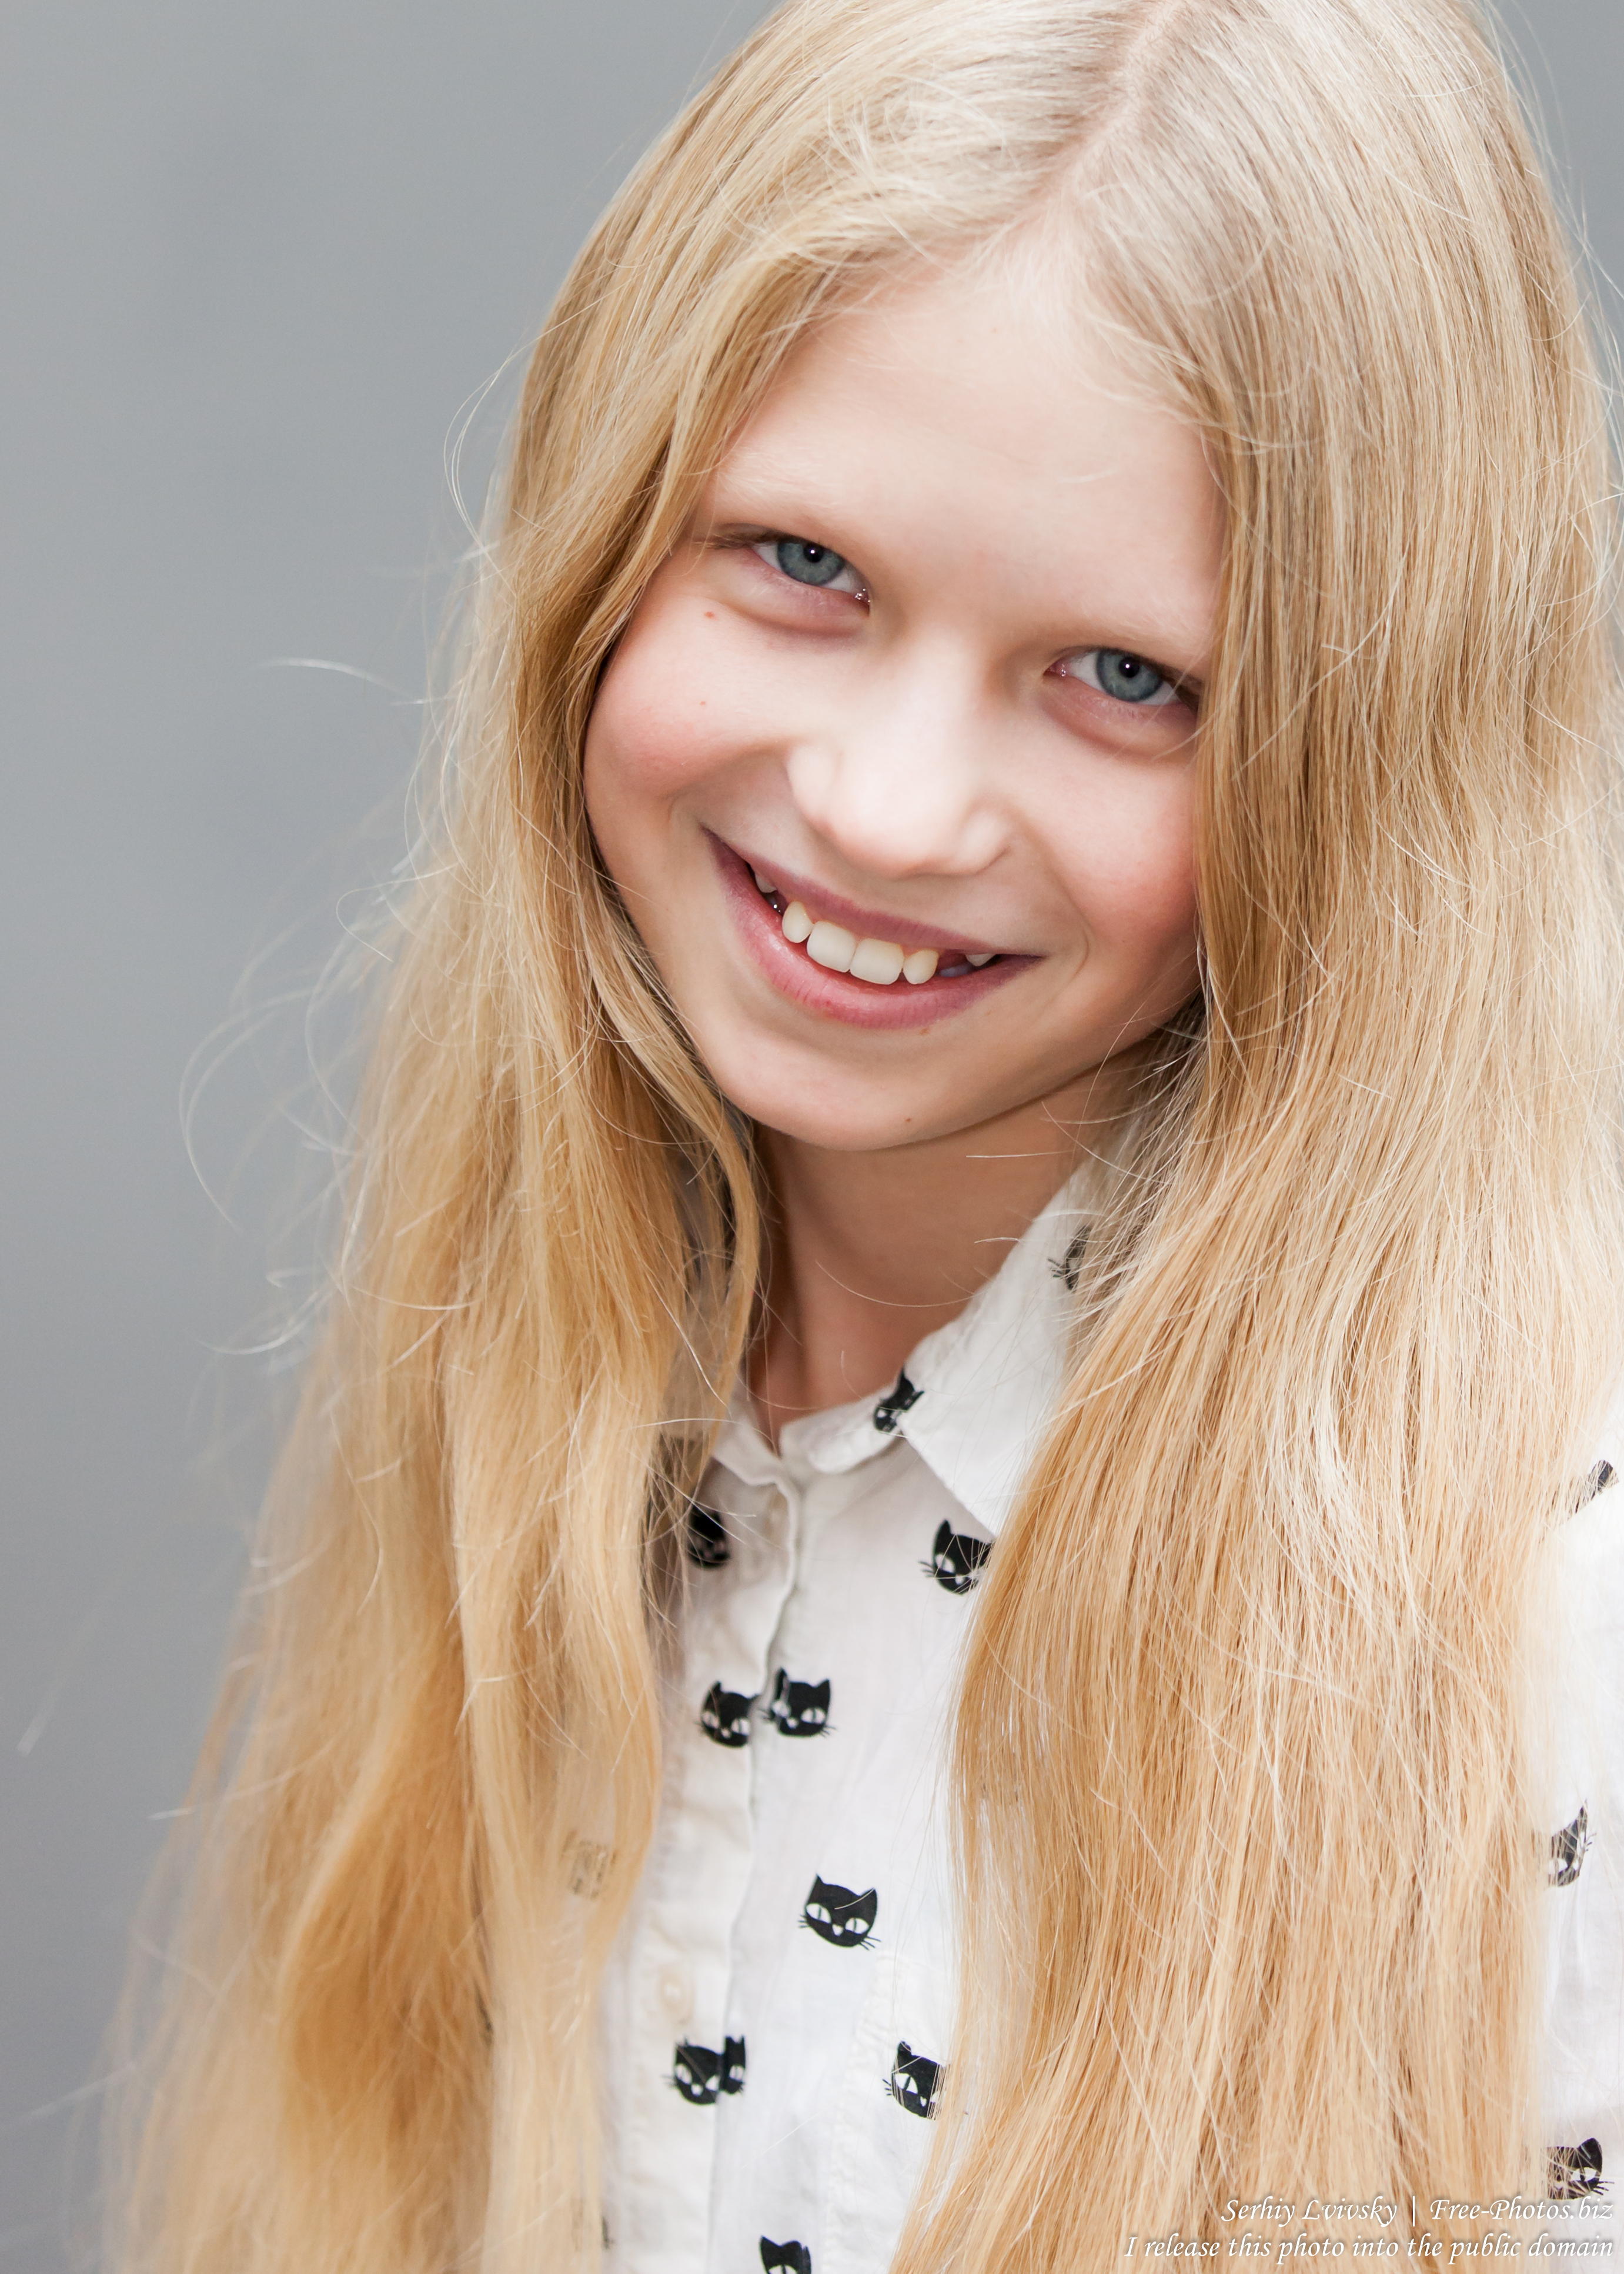 a 12-year-old natural blond Catholic girl photographed by Serhiy Lvivsky in November 2015, picture 1